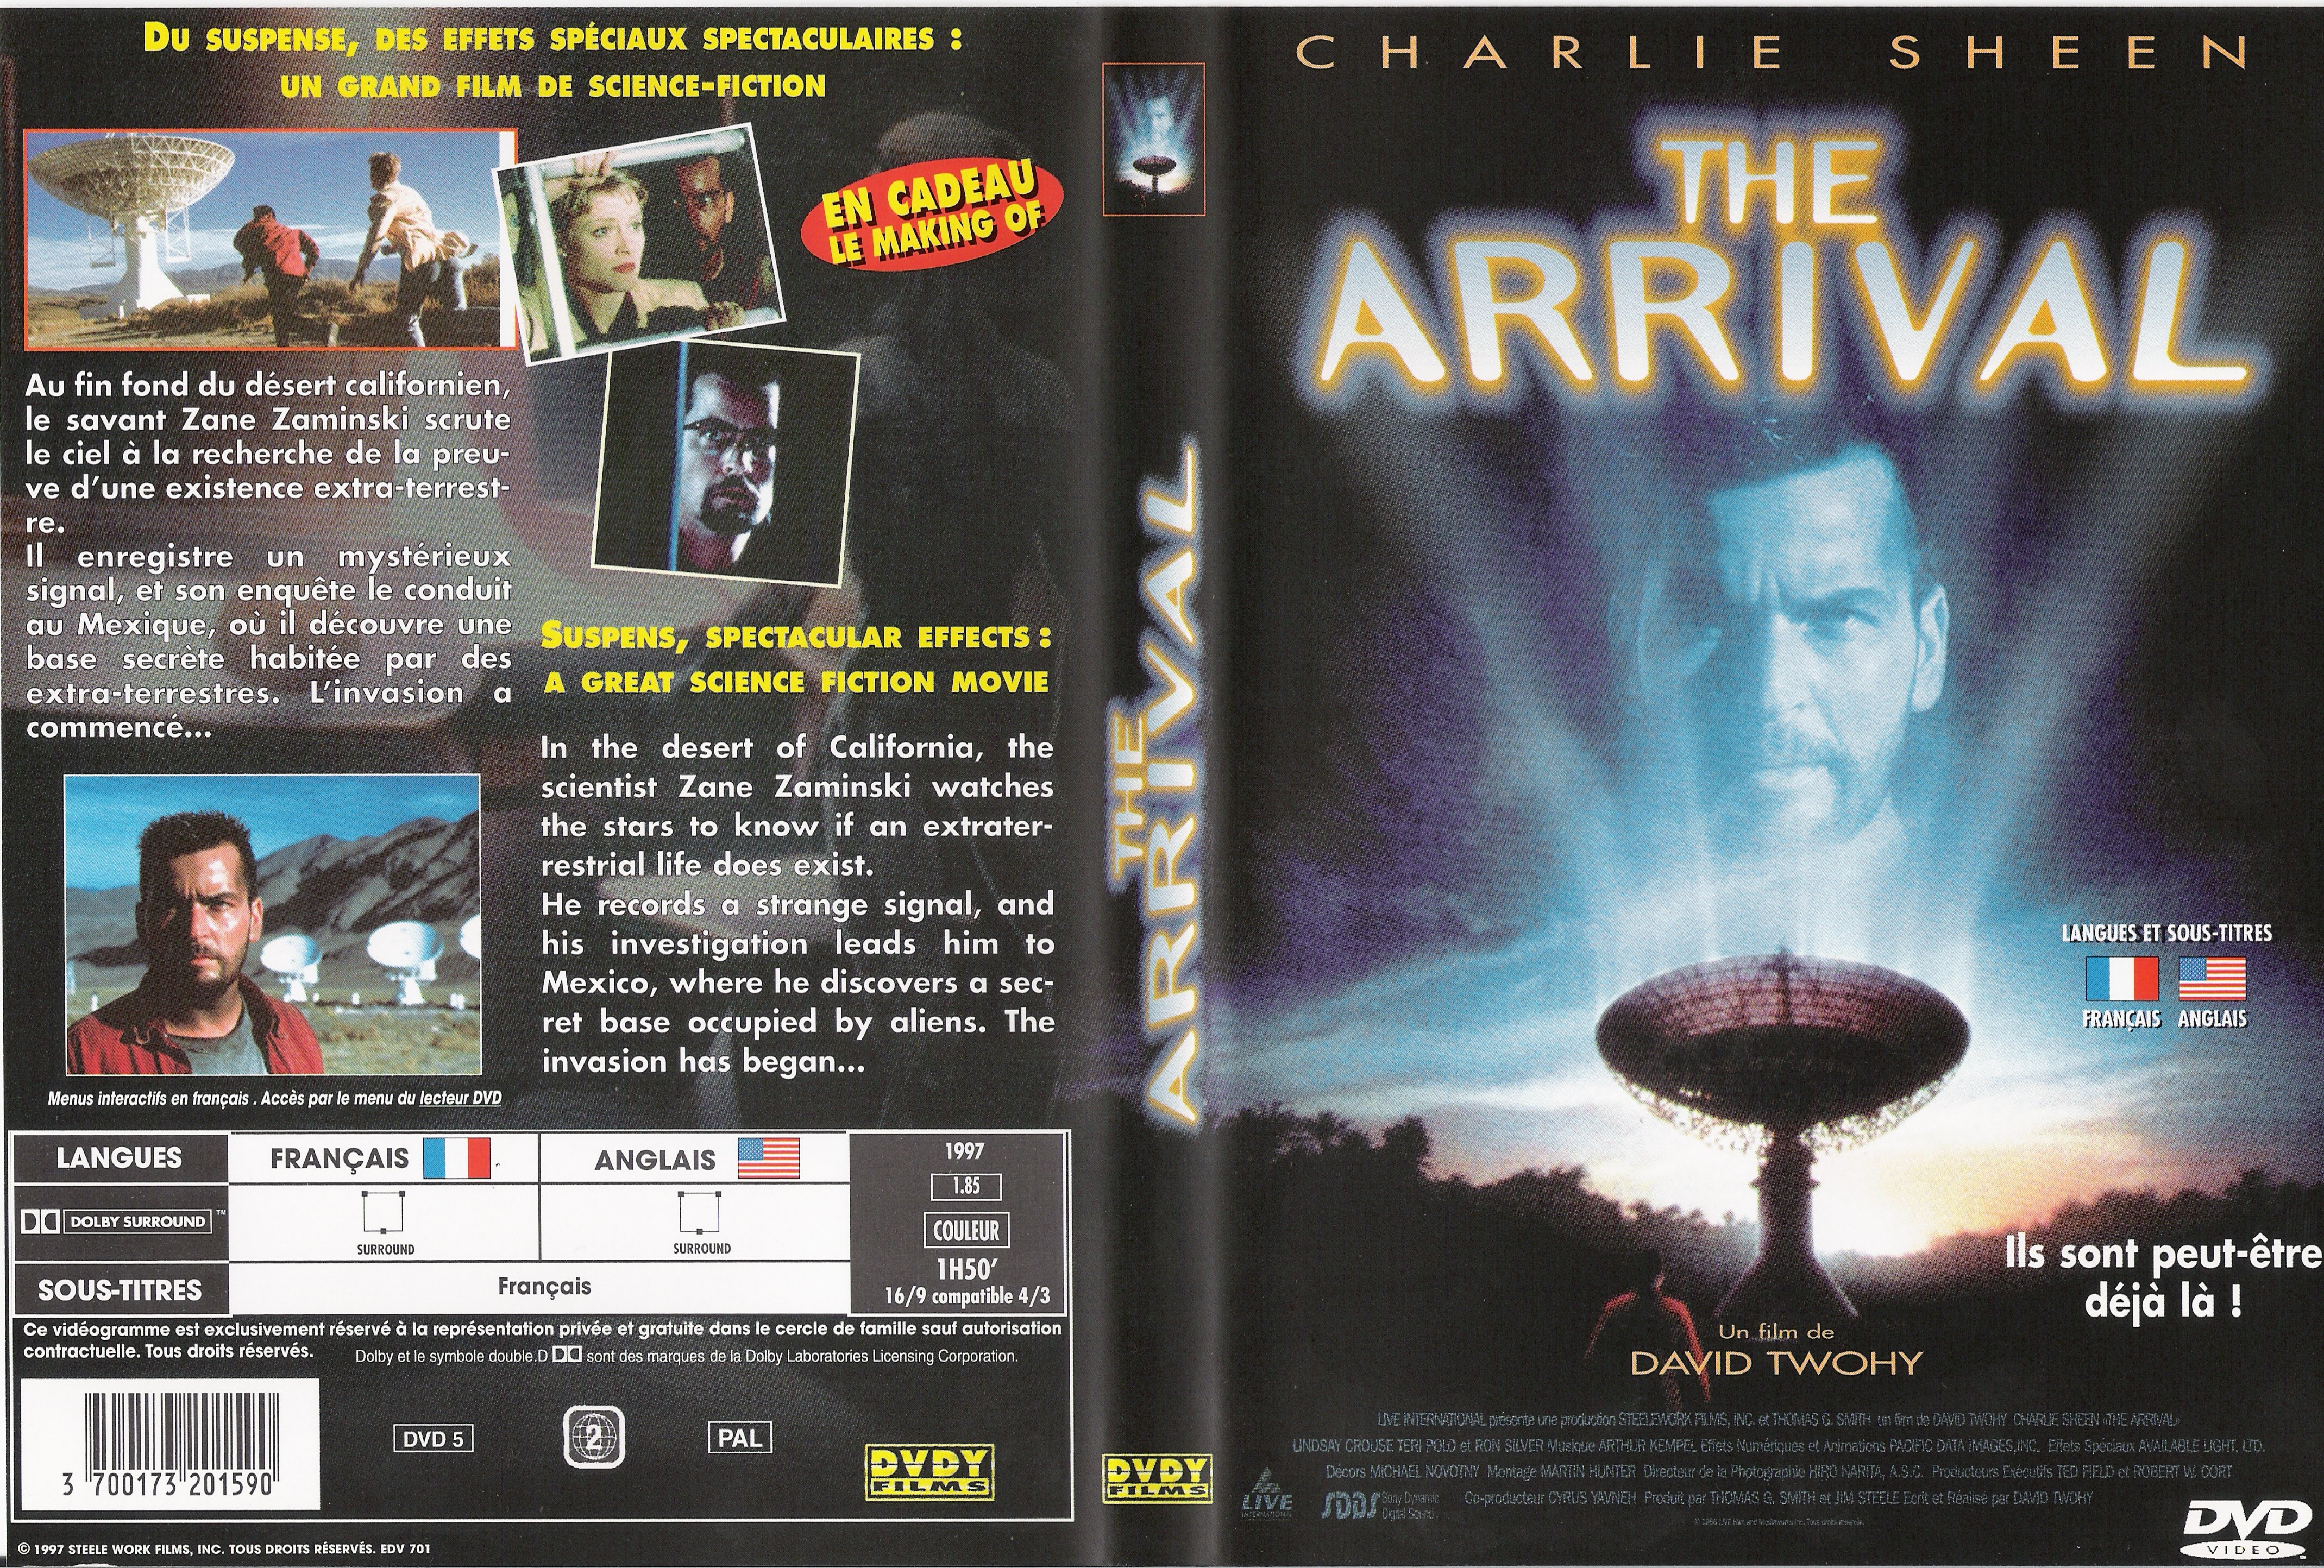 Jaquette DVD The arrival